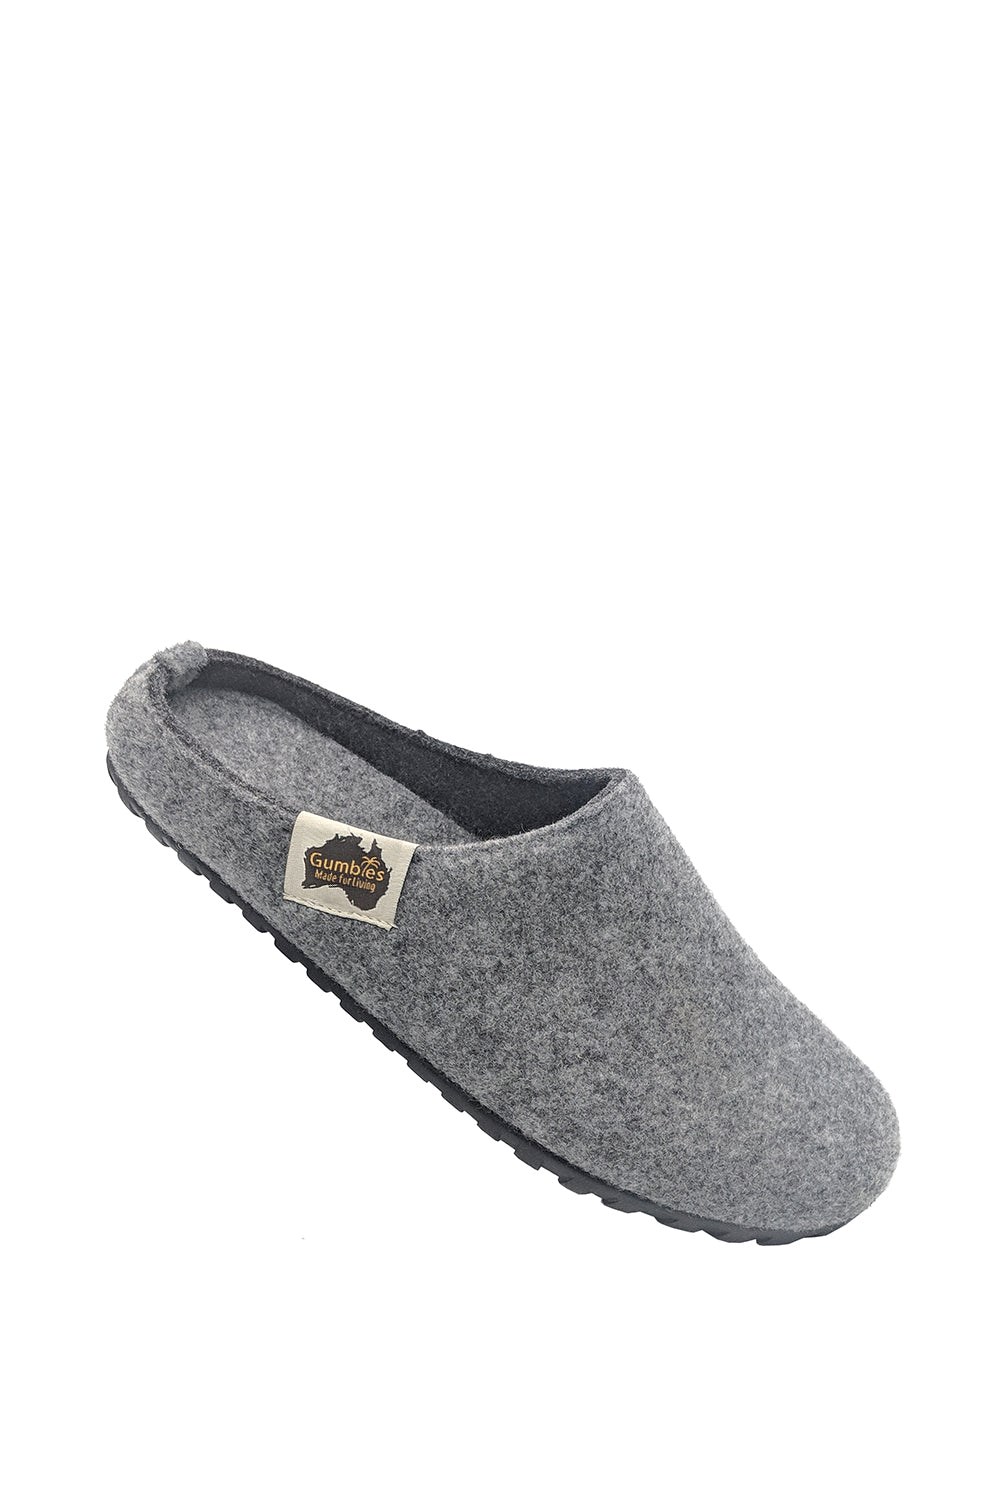 Outback Womens Slippers -